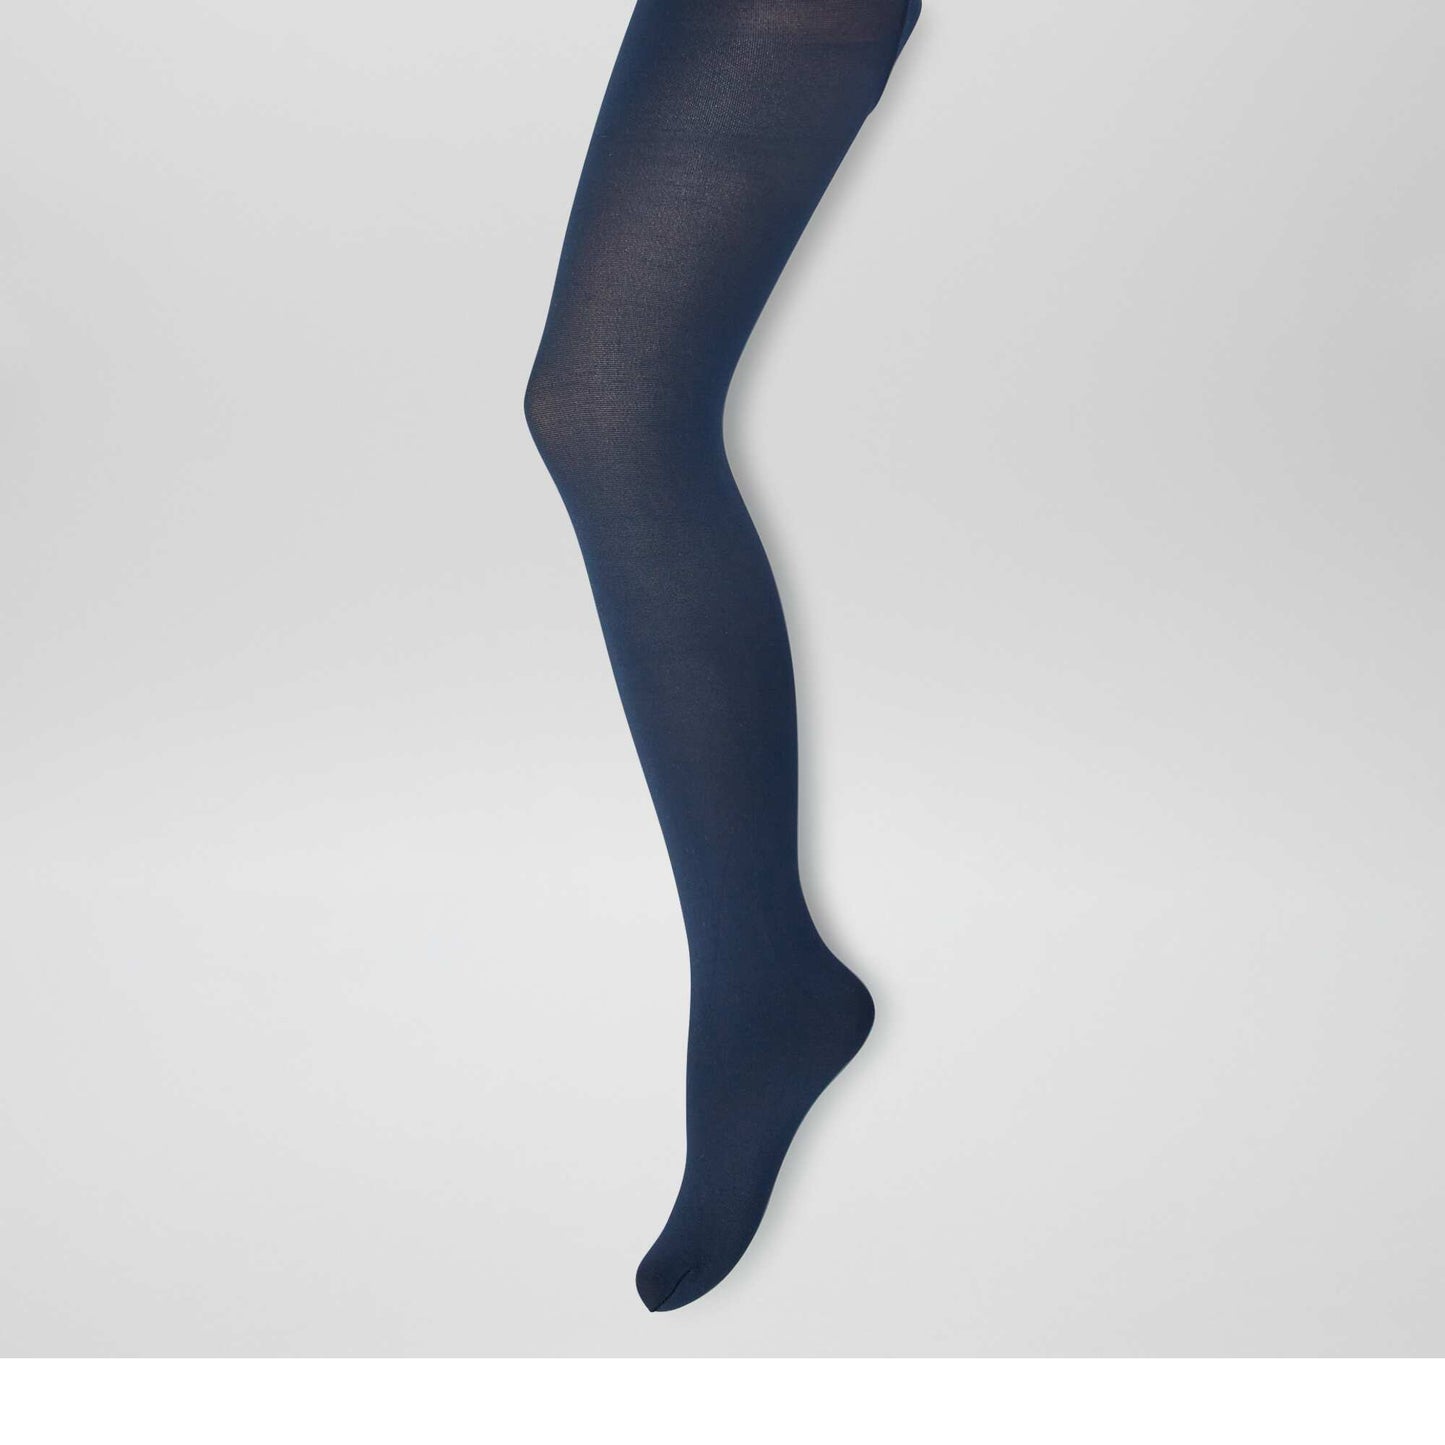 Pack of 2 pairs of opaque tights navy